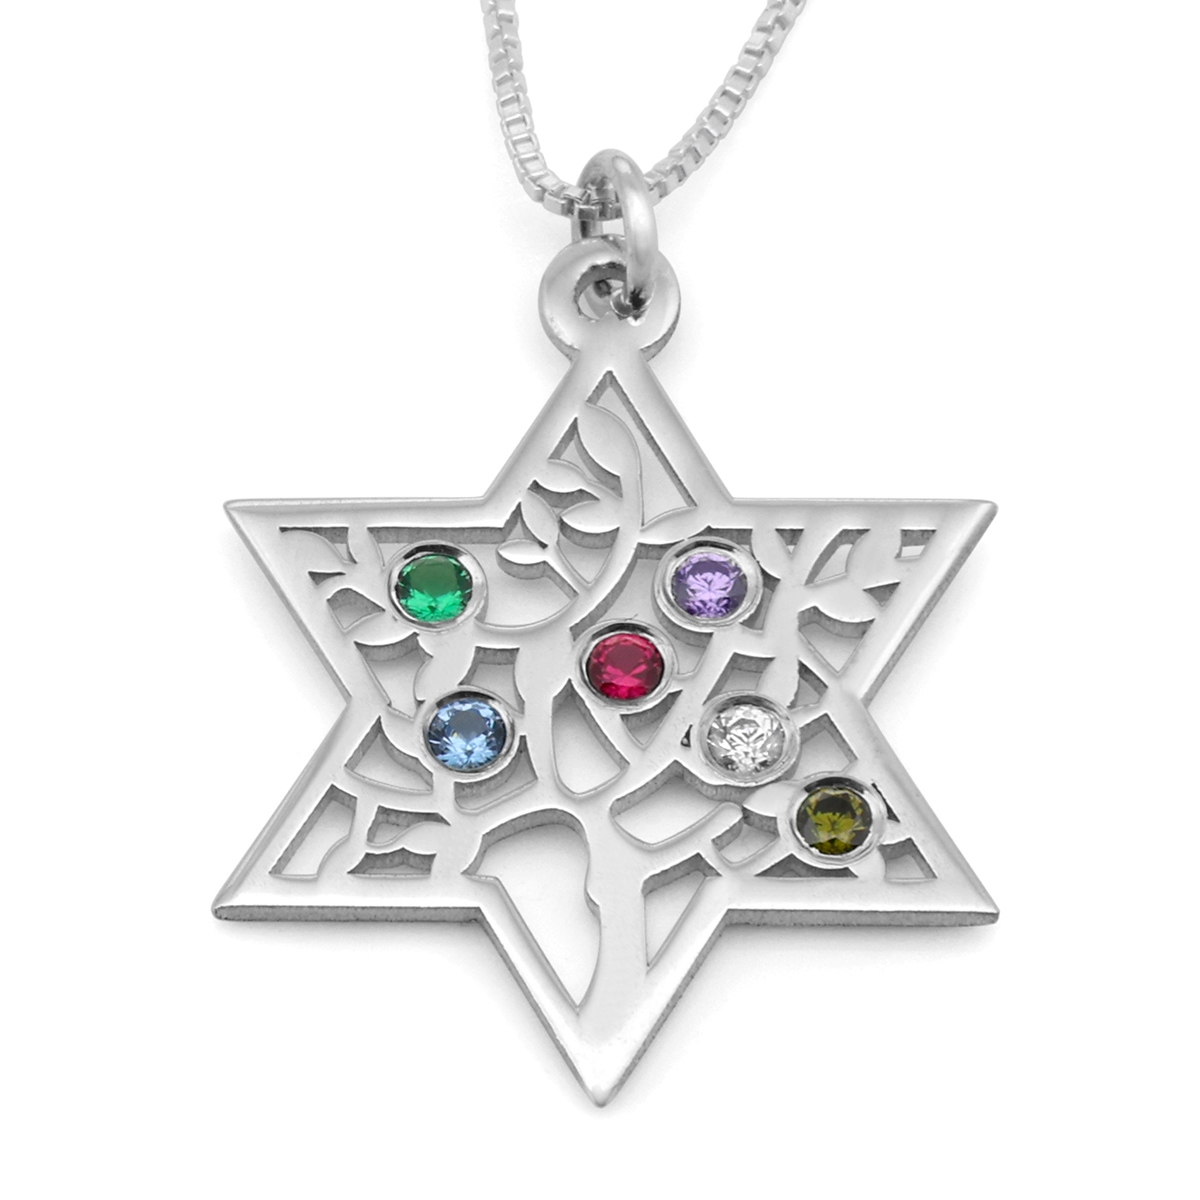 Birthstone Star of David and Tree of Life Necklace - Sterling Silver or Gold Plated - 1